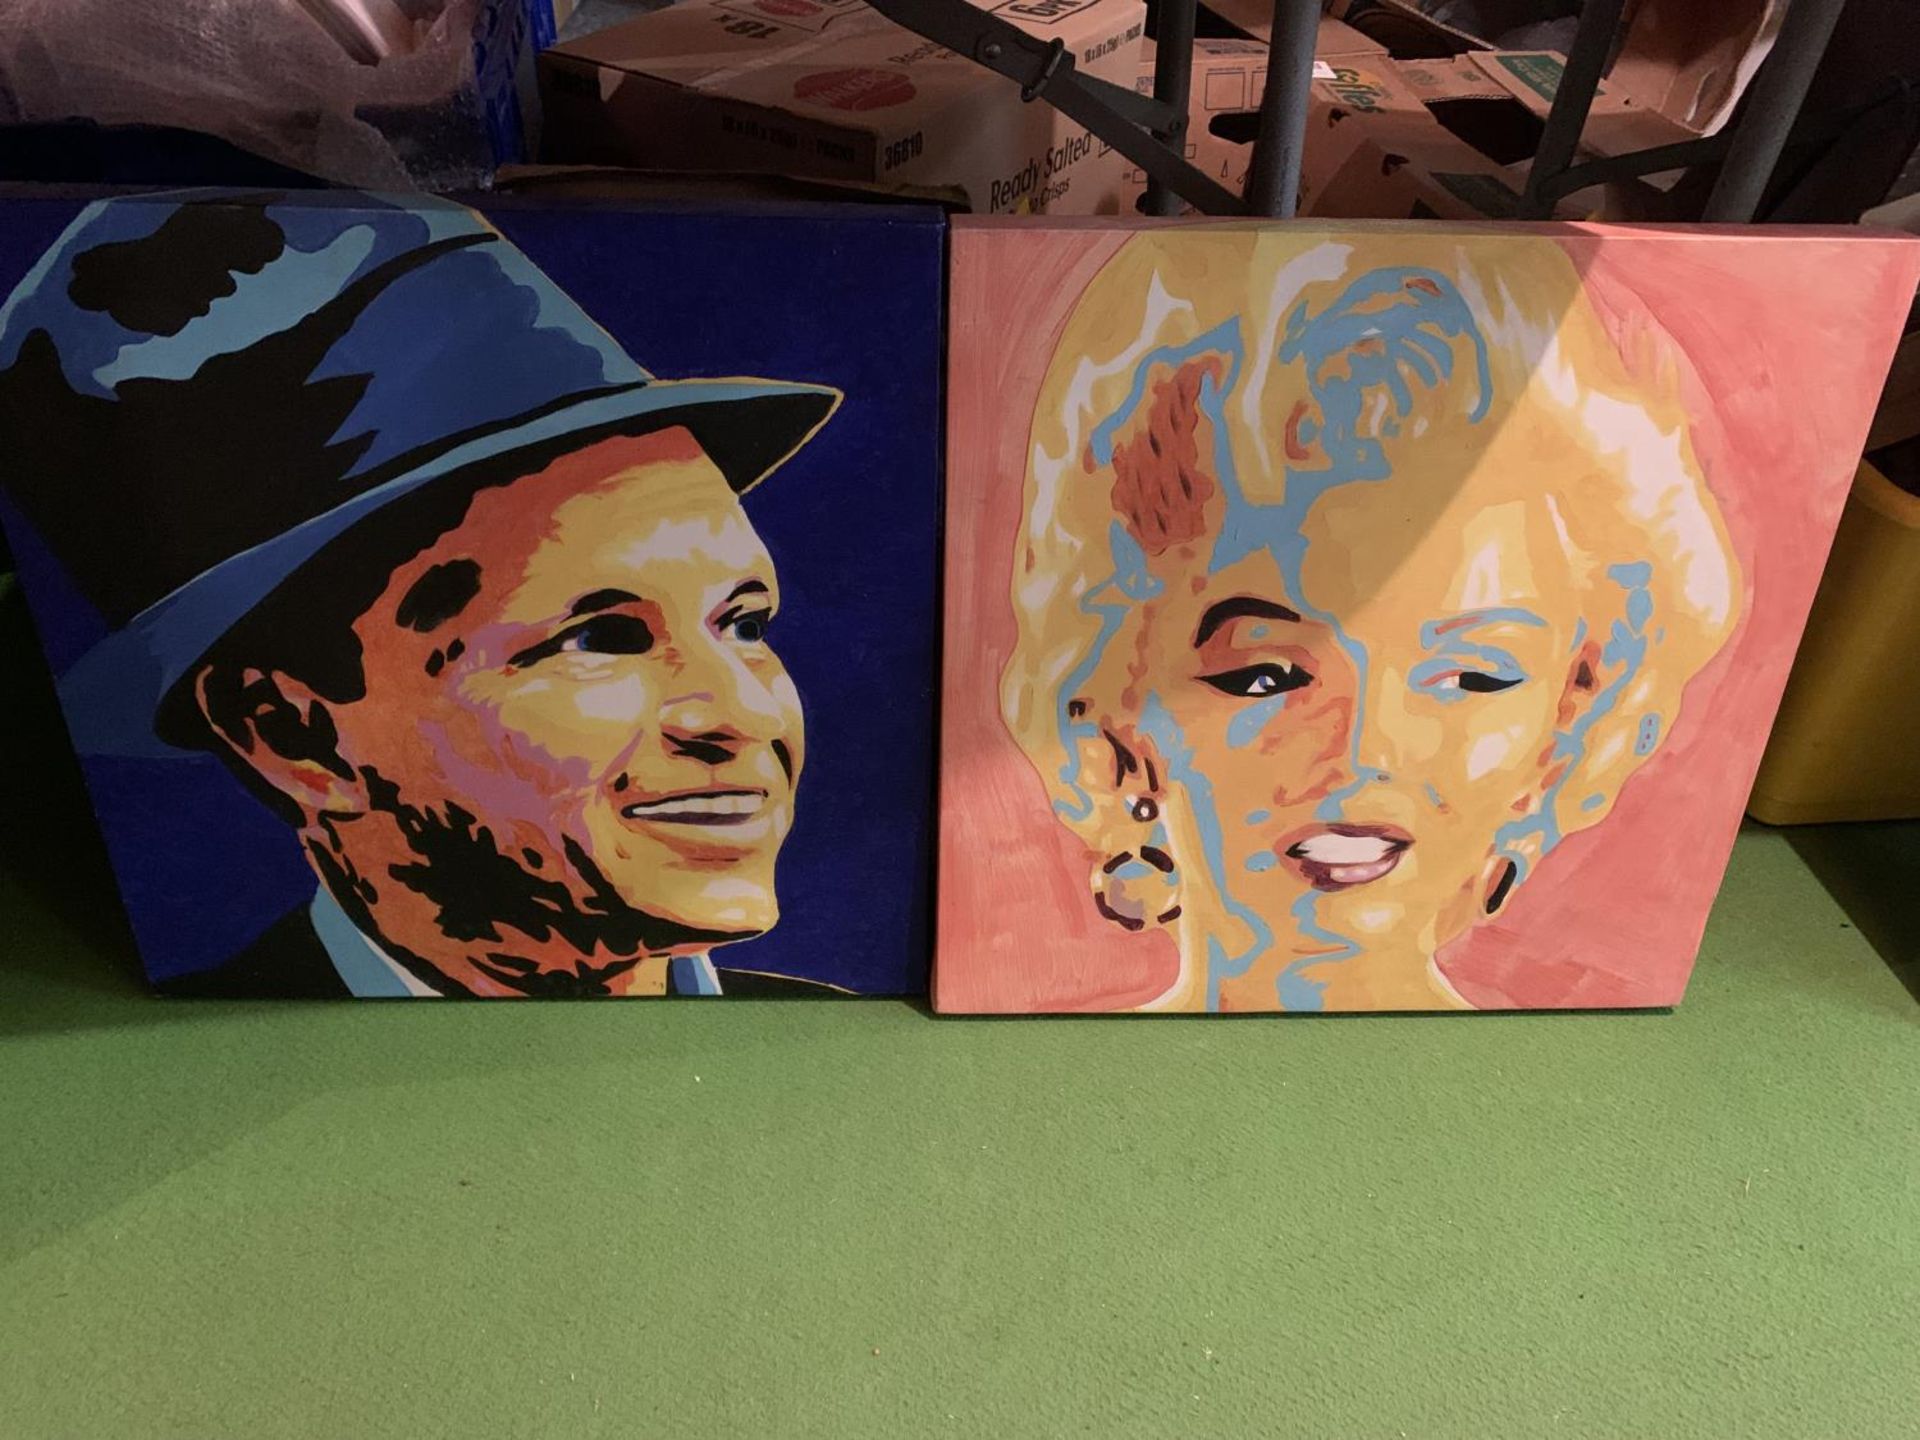 TWO ABSTRACT ART CANVASES SHOWING MARILYN MUNROE AND FRANK SINATRA